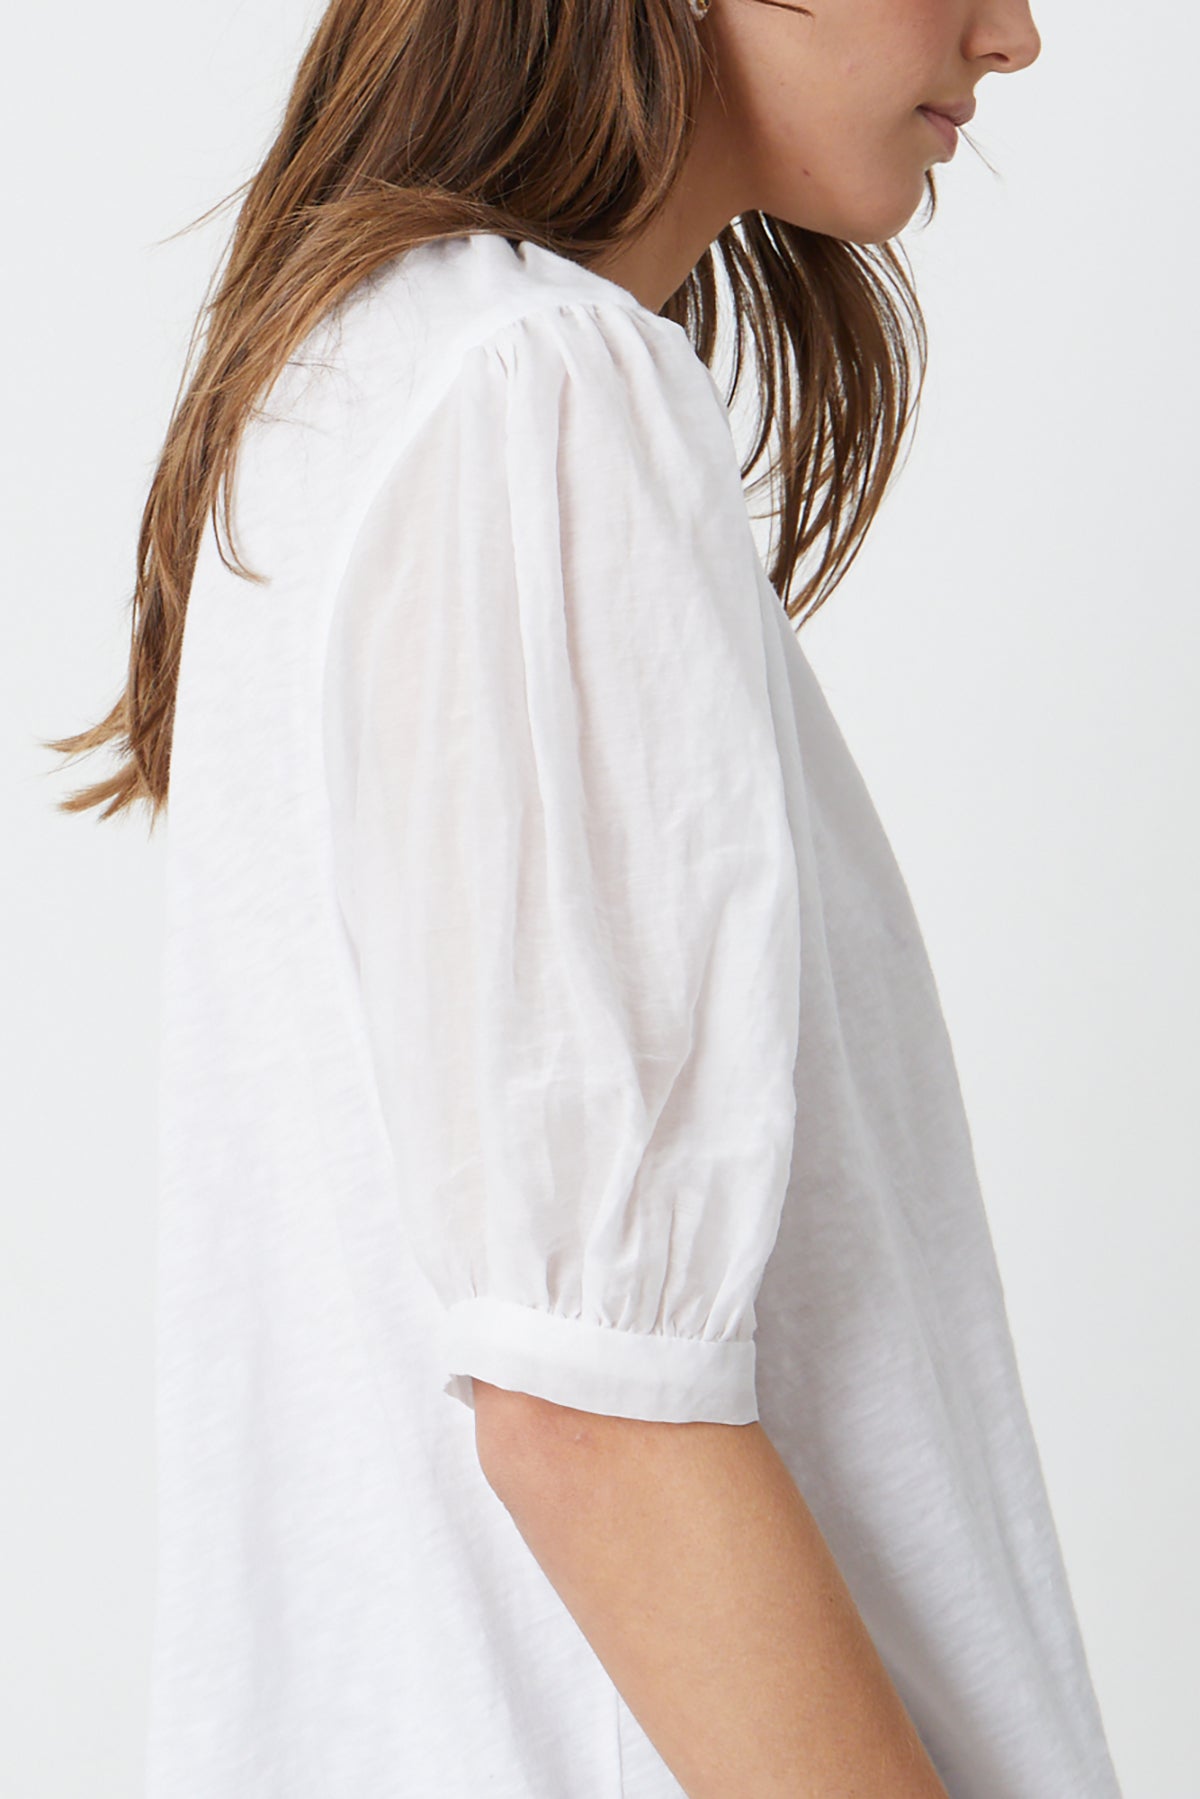   Mallory Top in white side detail with puff sleeve 